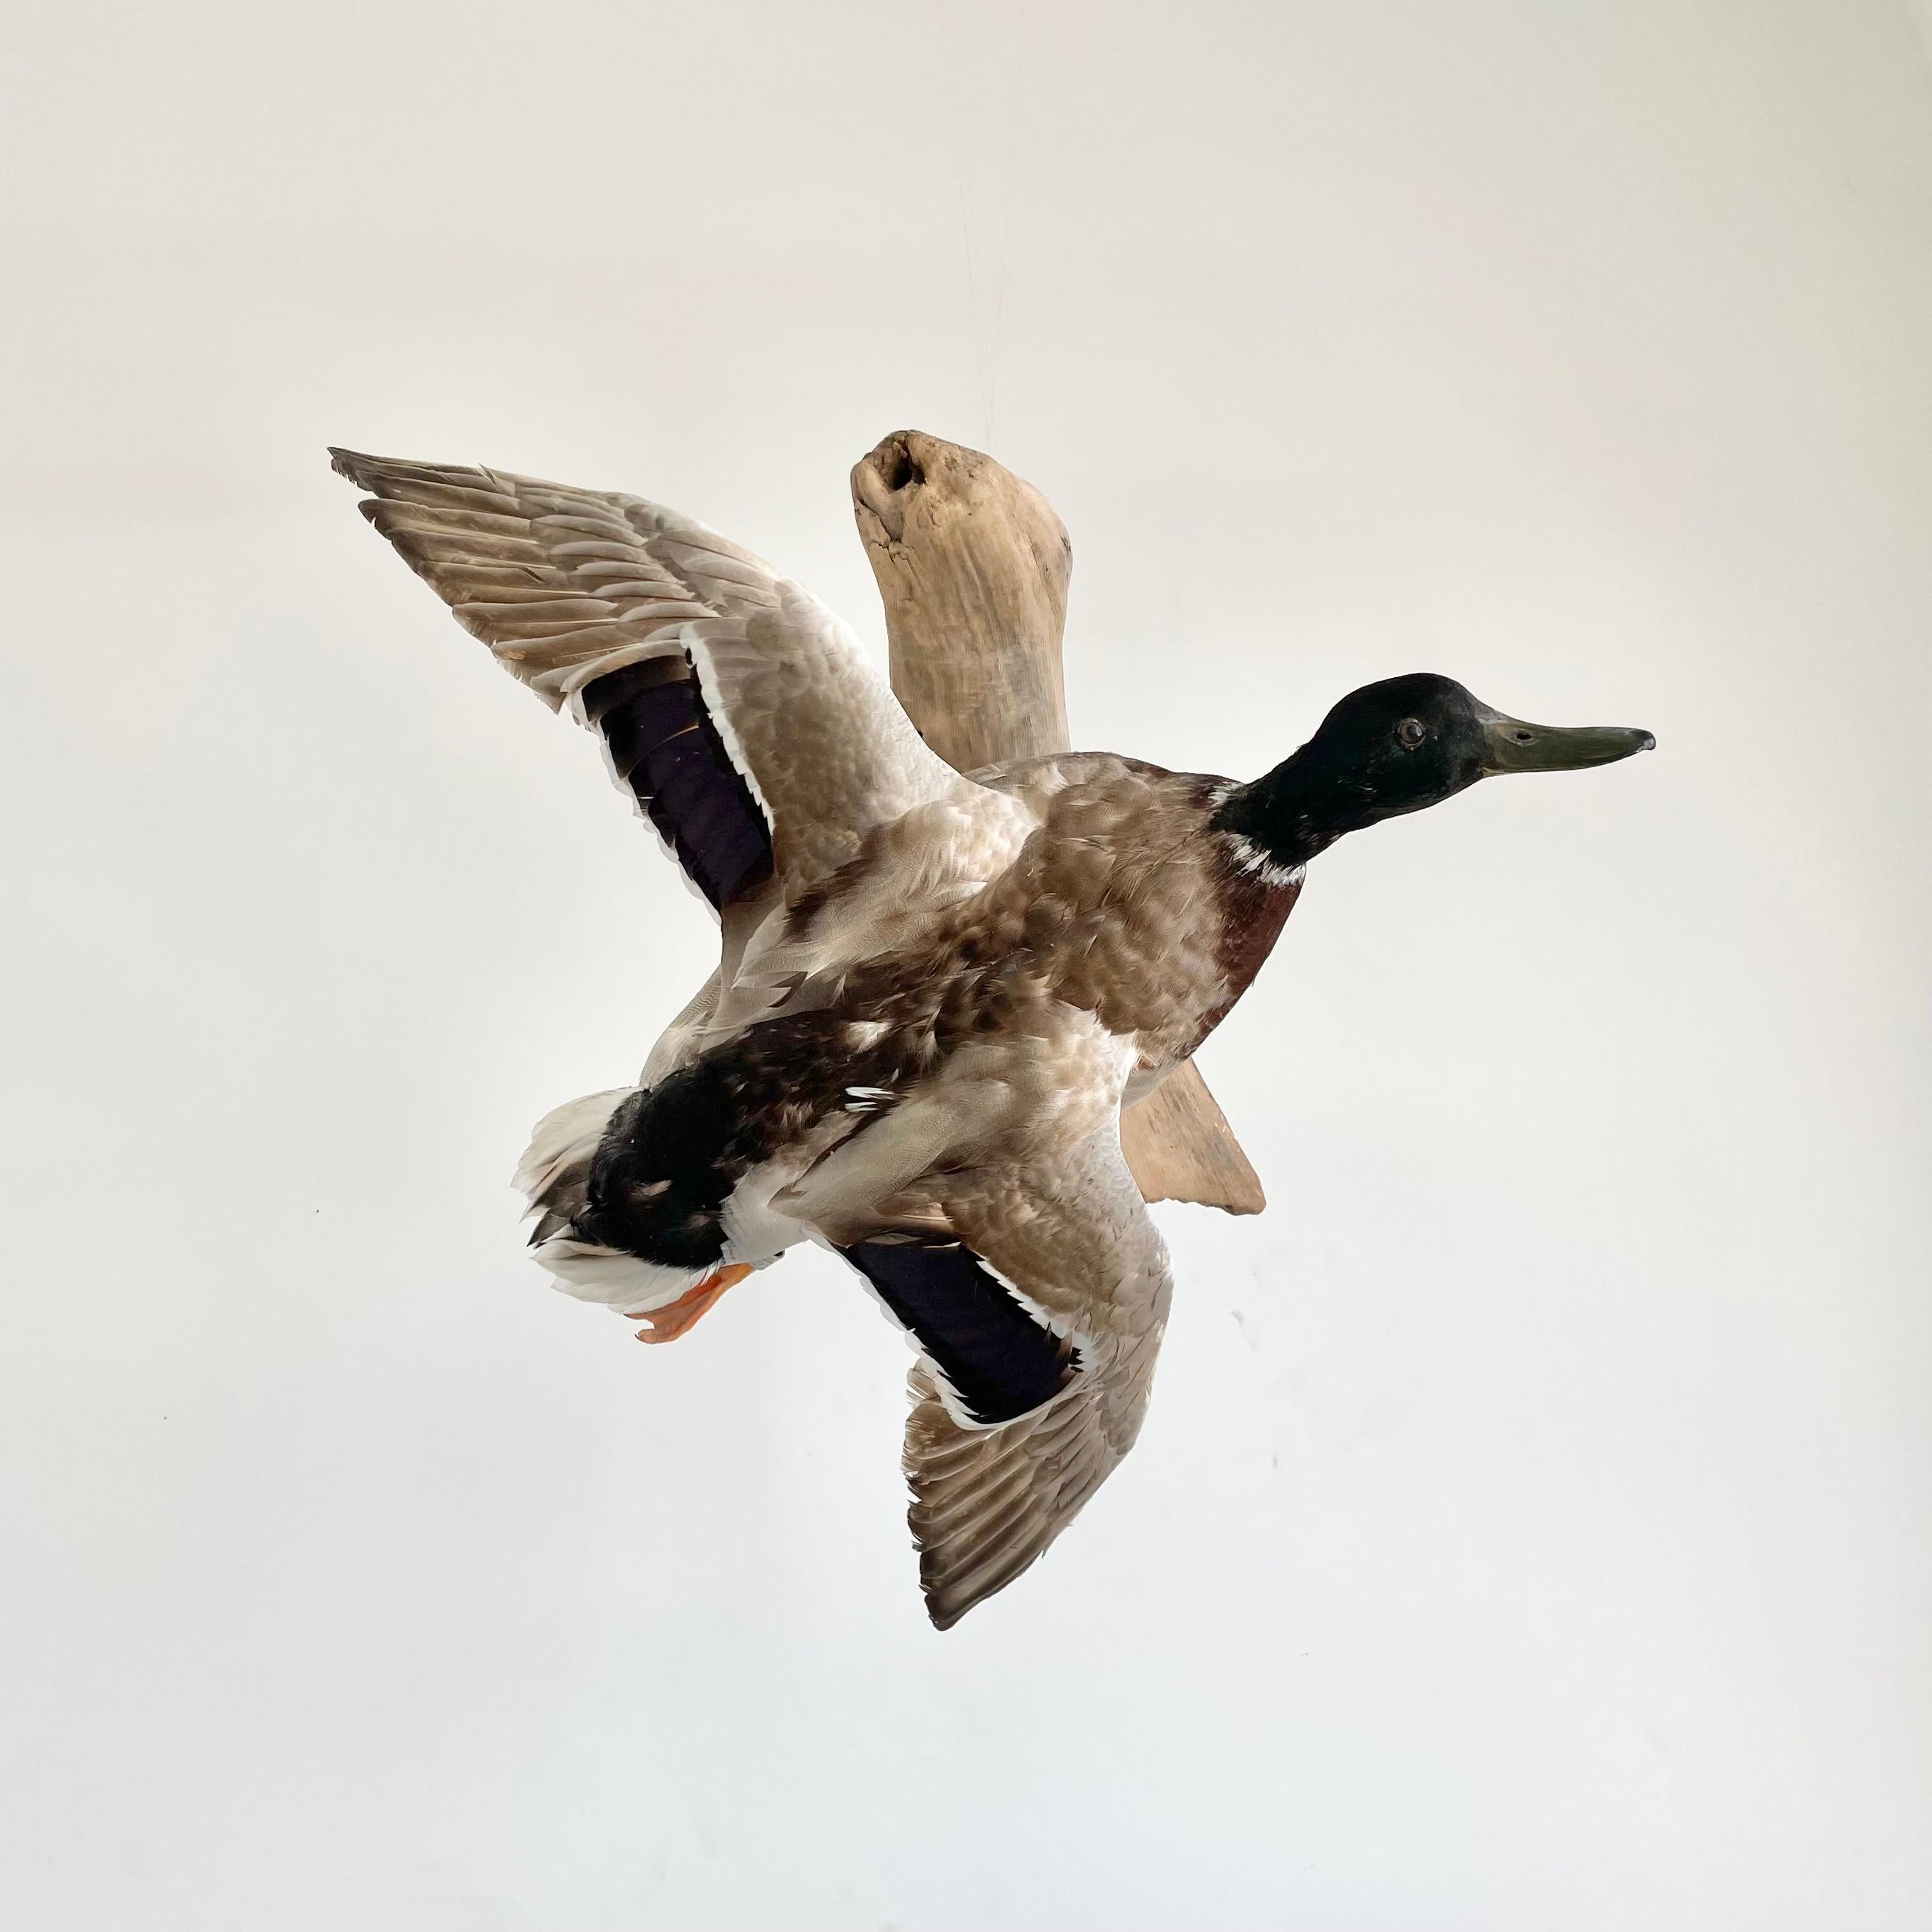 Taxidermy duck in flight with wooden mount. Beautiful coloring with feathers ranging from dark purple to white, tan, black and emerald green. Feet and bill are a bright orange. Good overall condition. Good presence. Metal loop on back of wood for